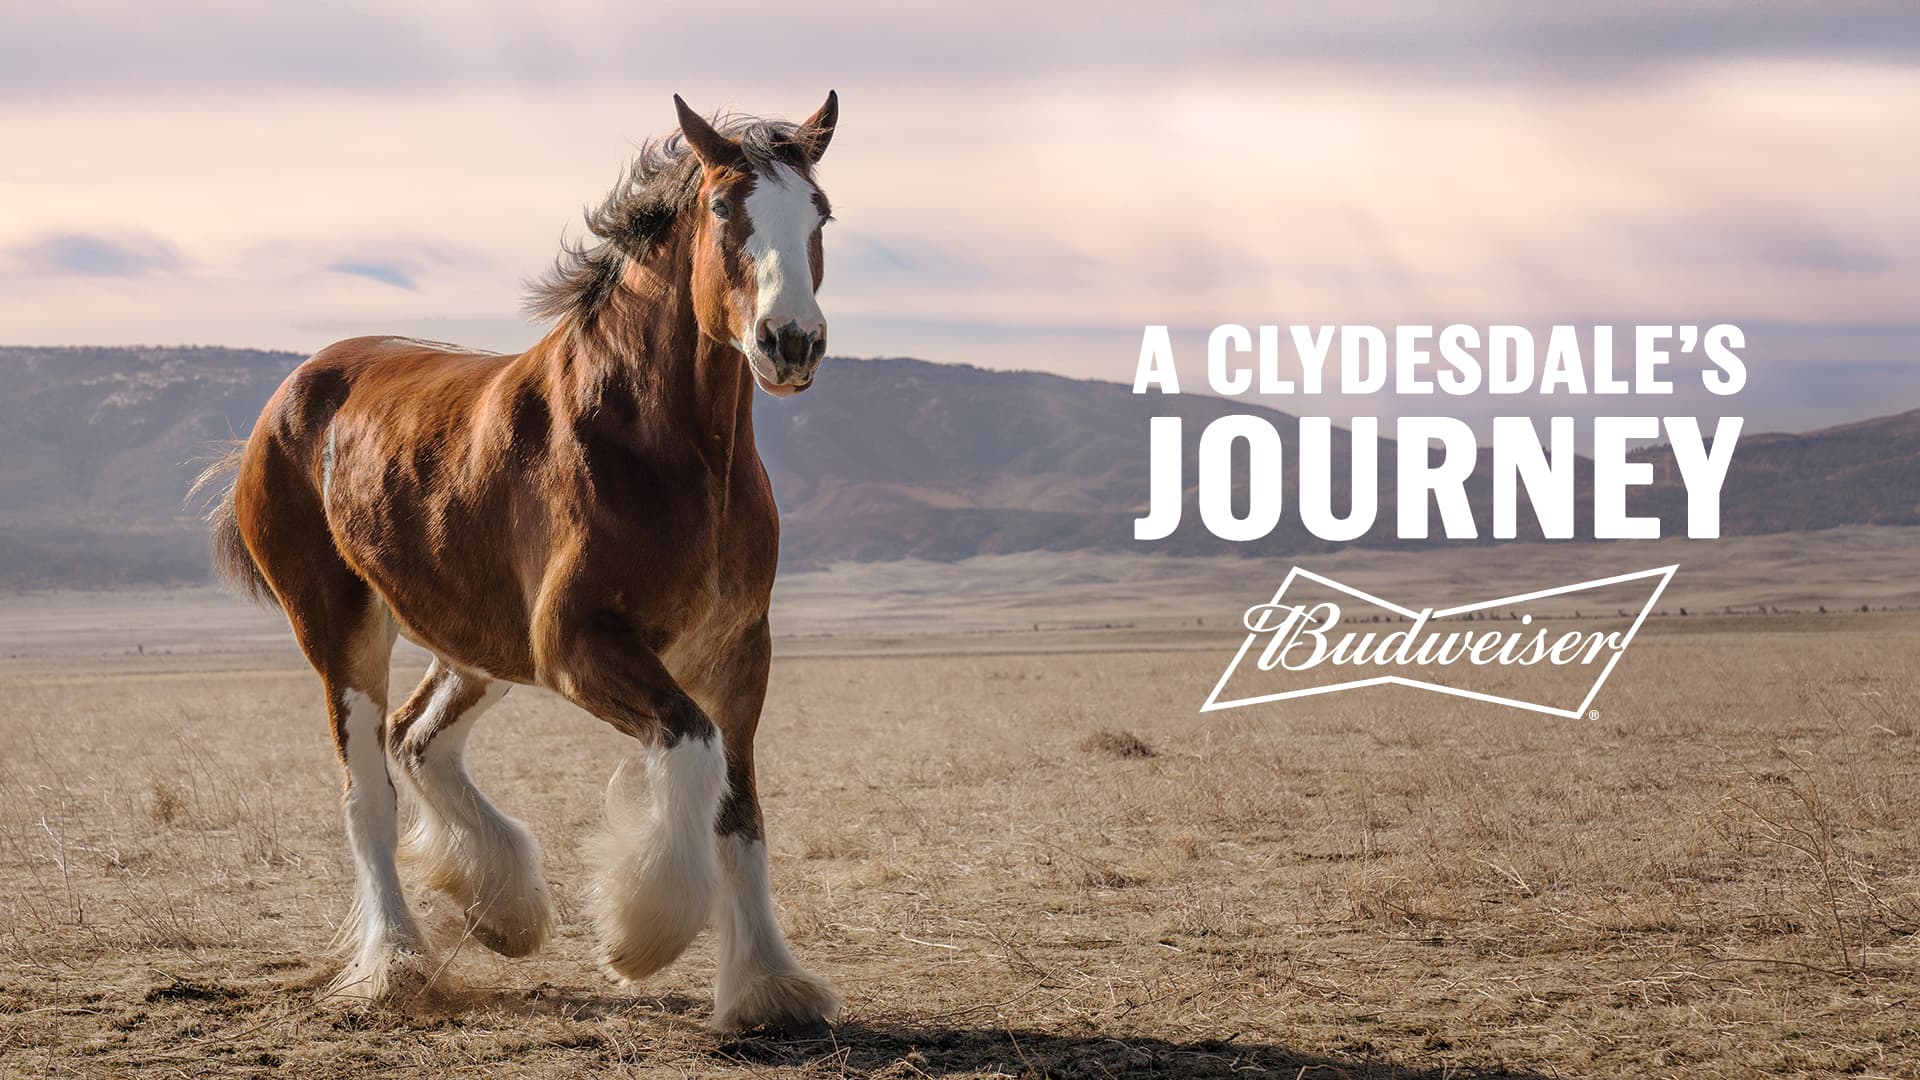 Budweiser's iconic Clydesdale returns in its 2022 Super Bowl ad